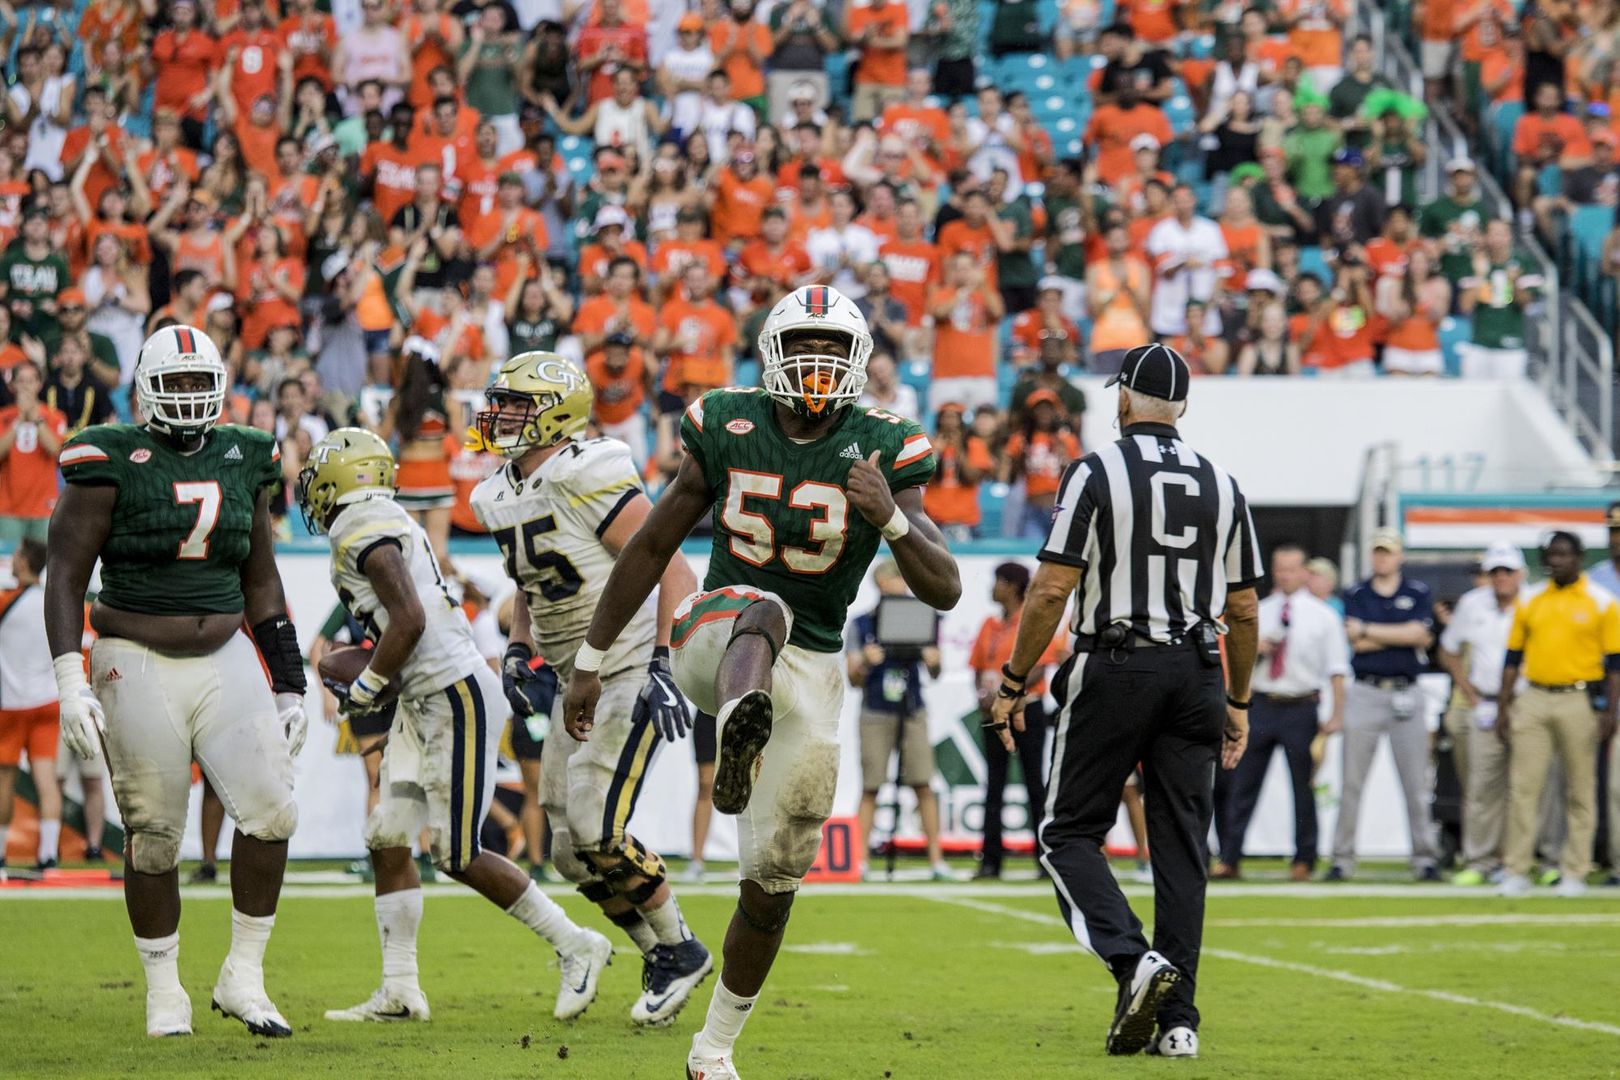 Canes Look to Slow Syracuse's Tempo